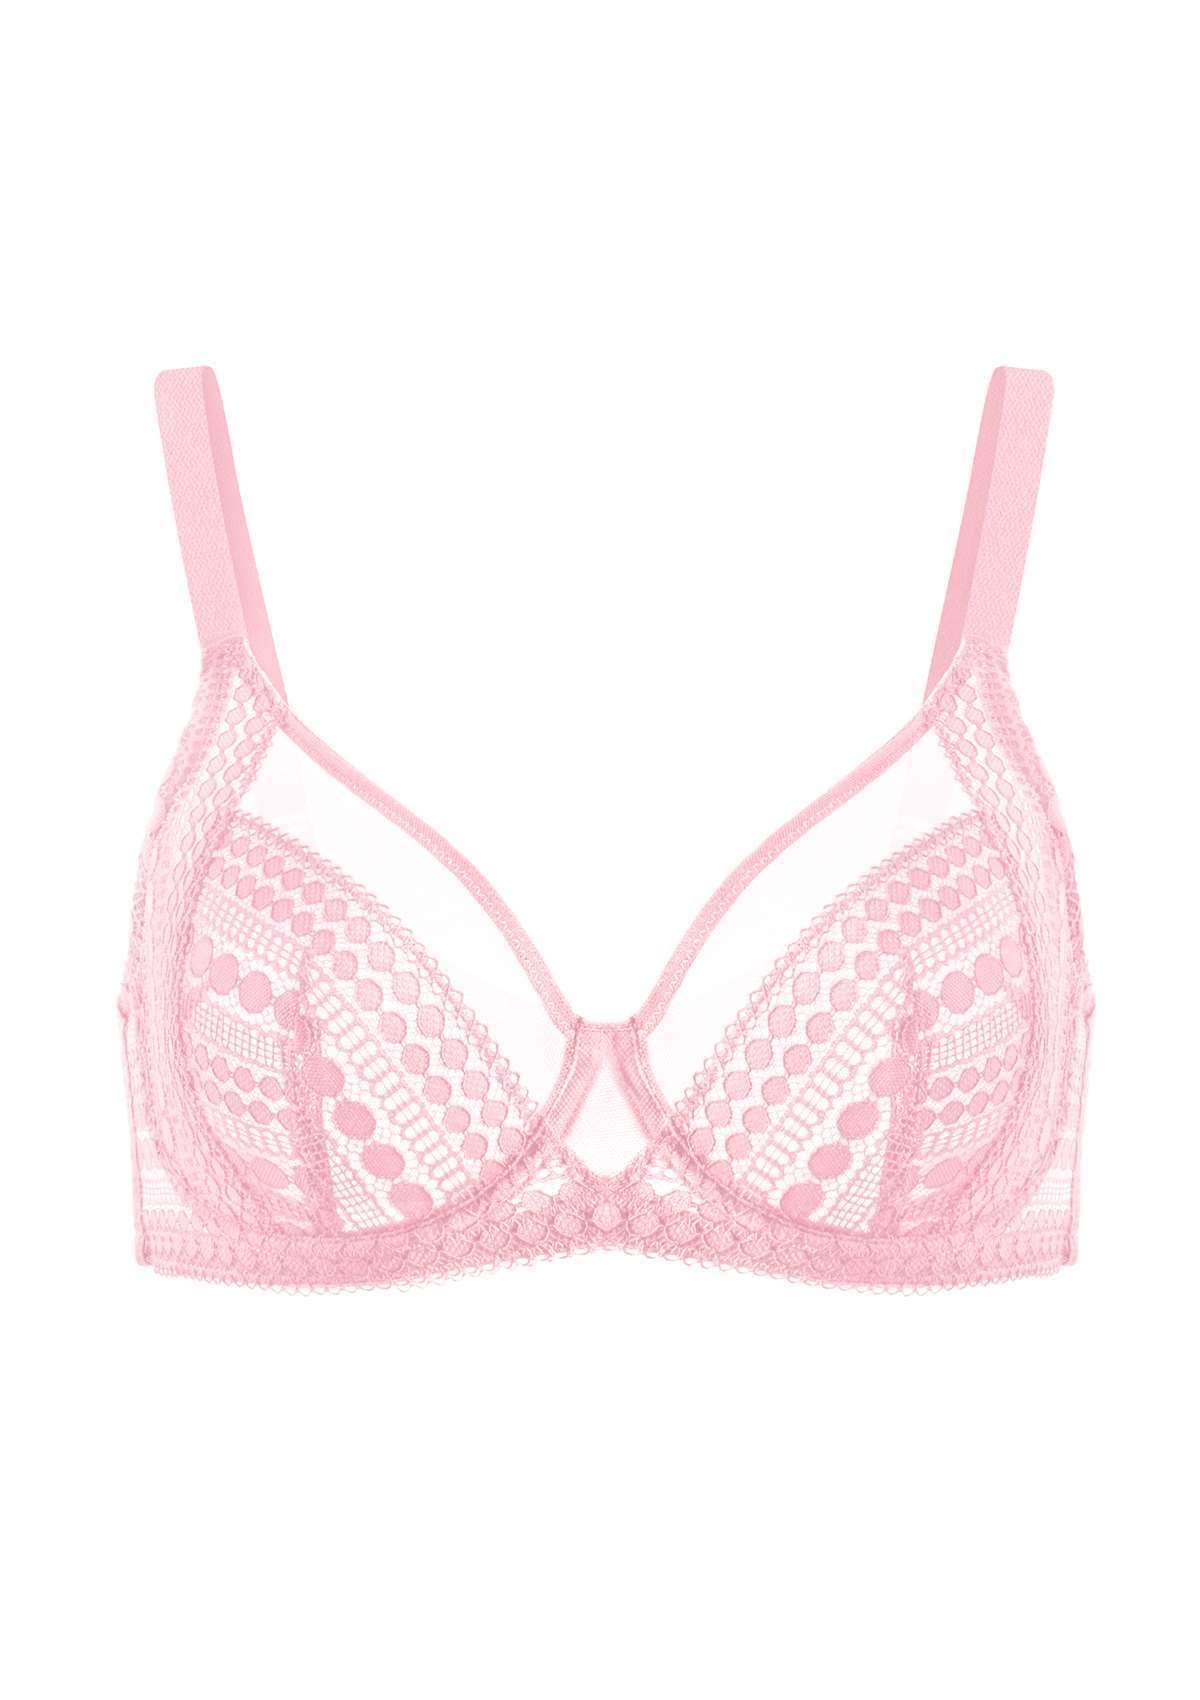 HSIA Heroine Lace Bra And Panties Set: Most Comfortable Supportive Bra - Pink / 42 / DDD/F